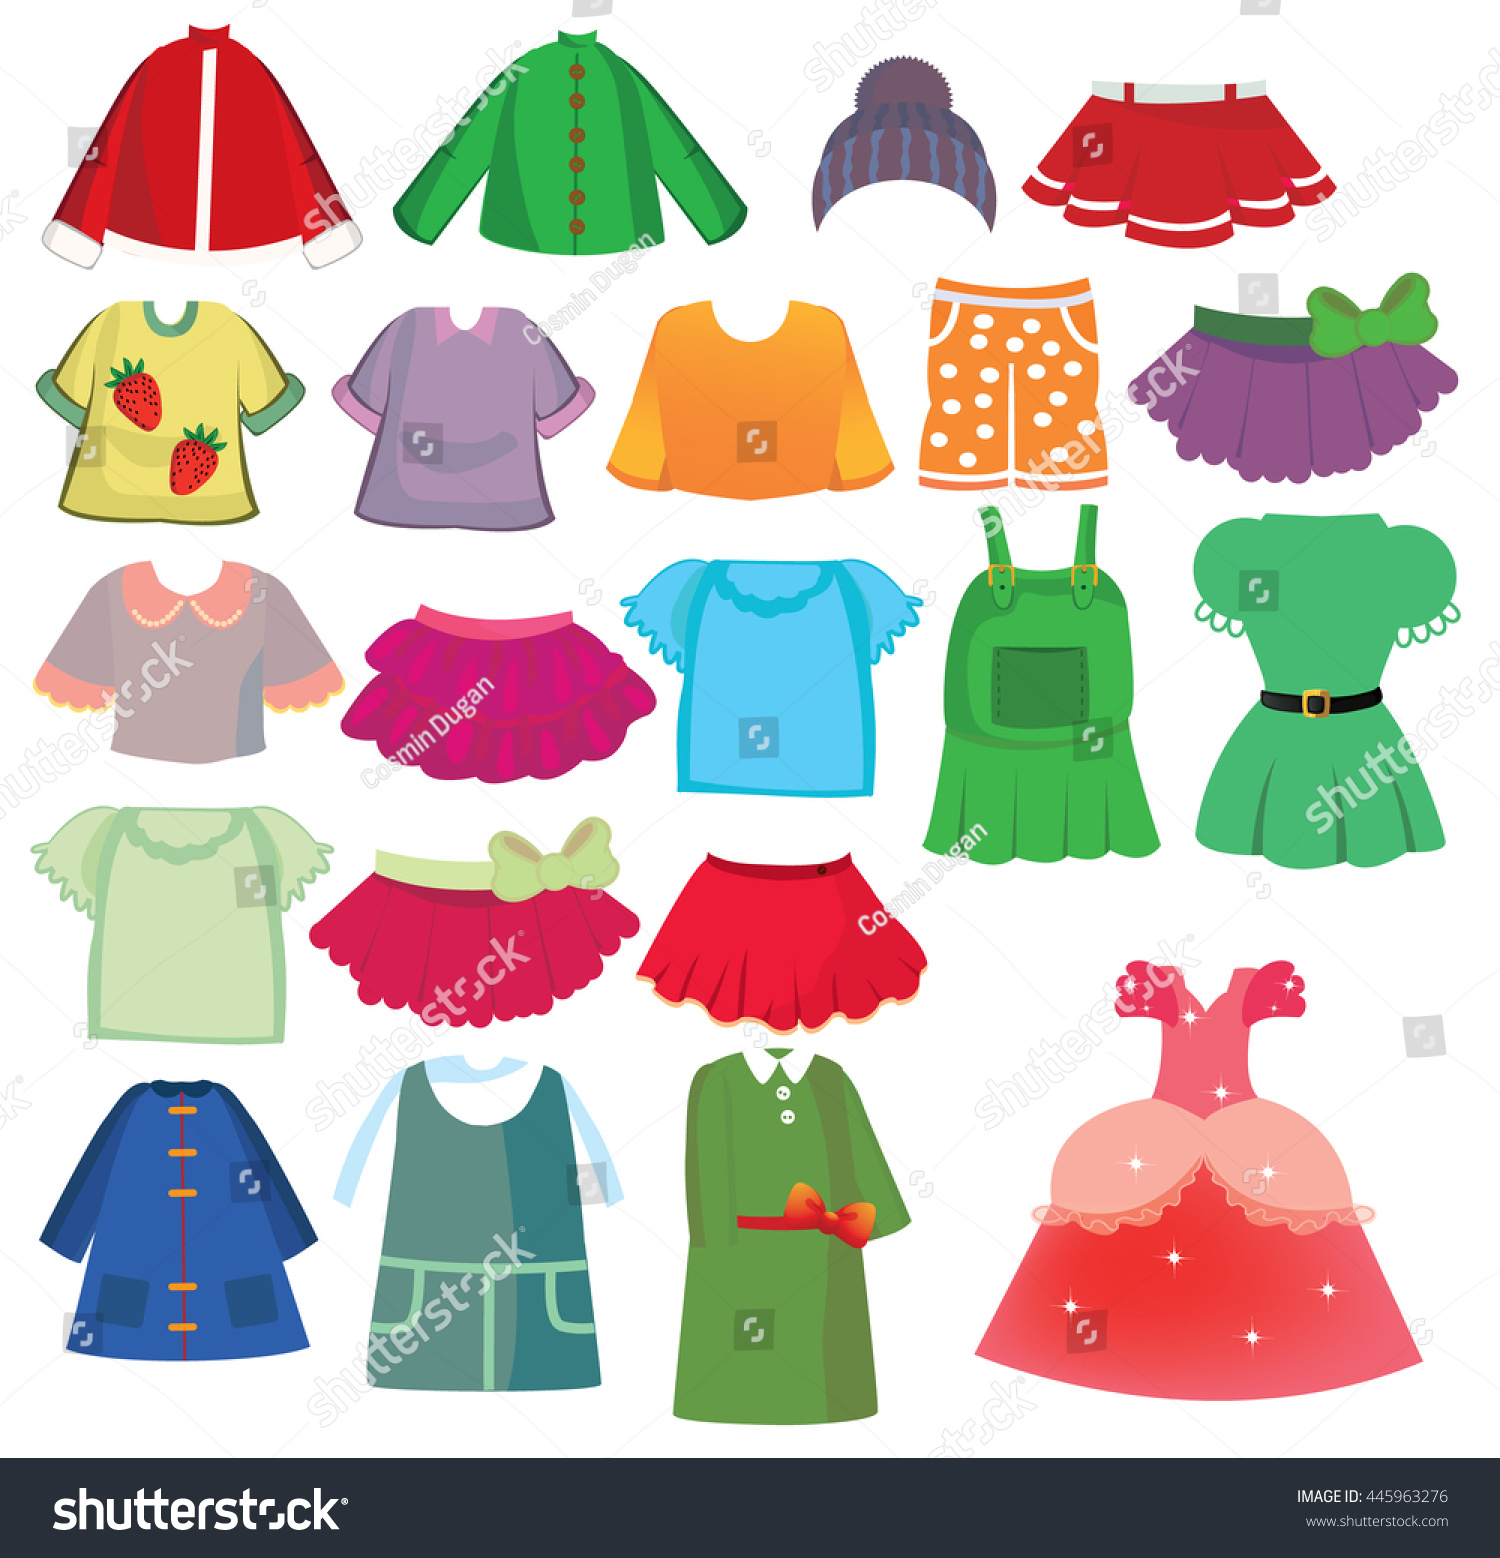 Clothes Collection Stock Vector Illustration 445963276 : Shutterstock